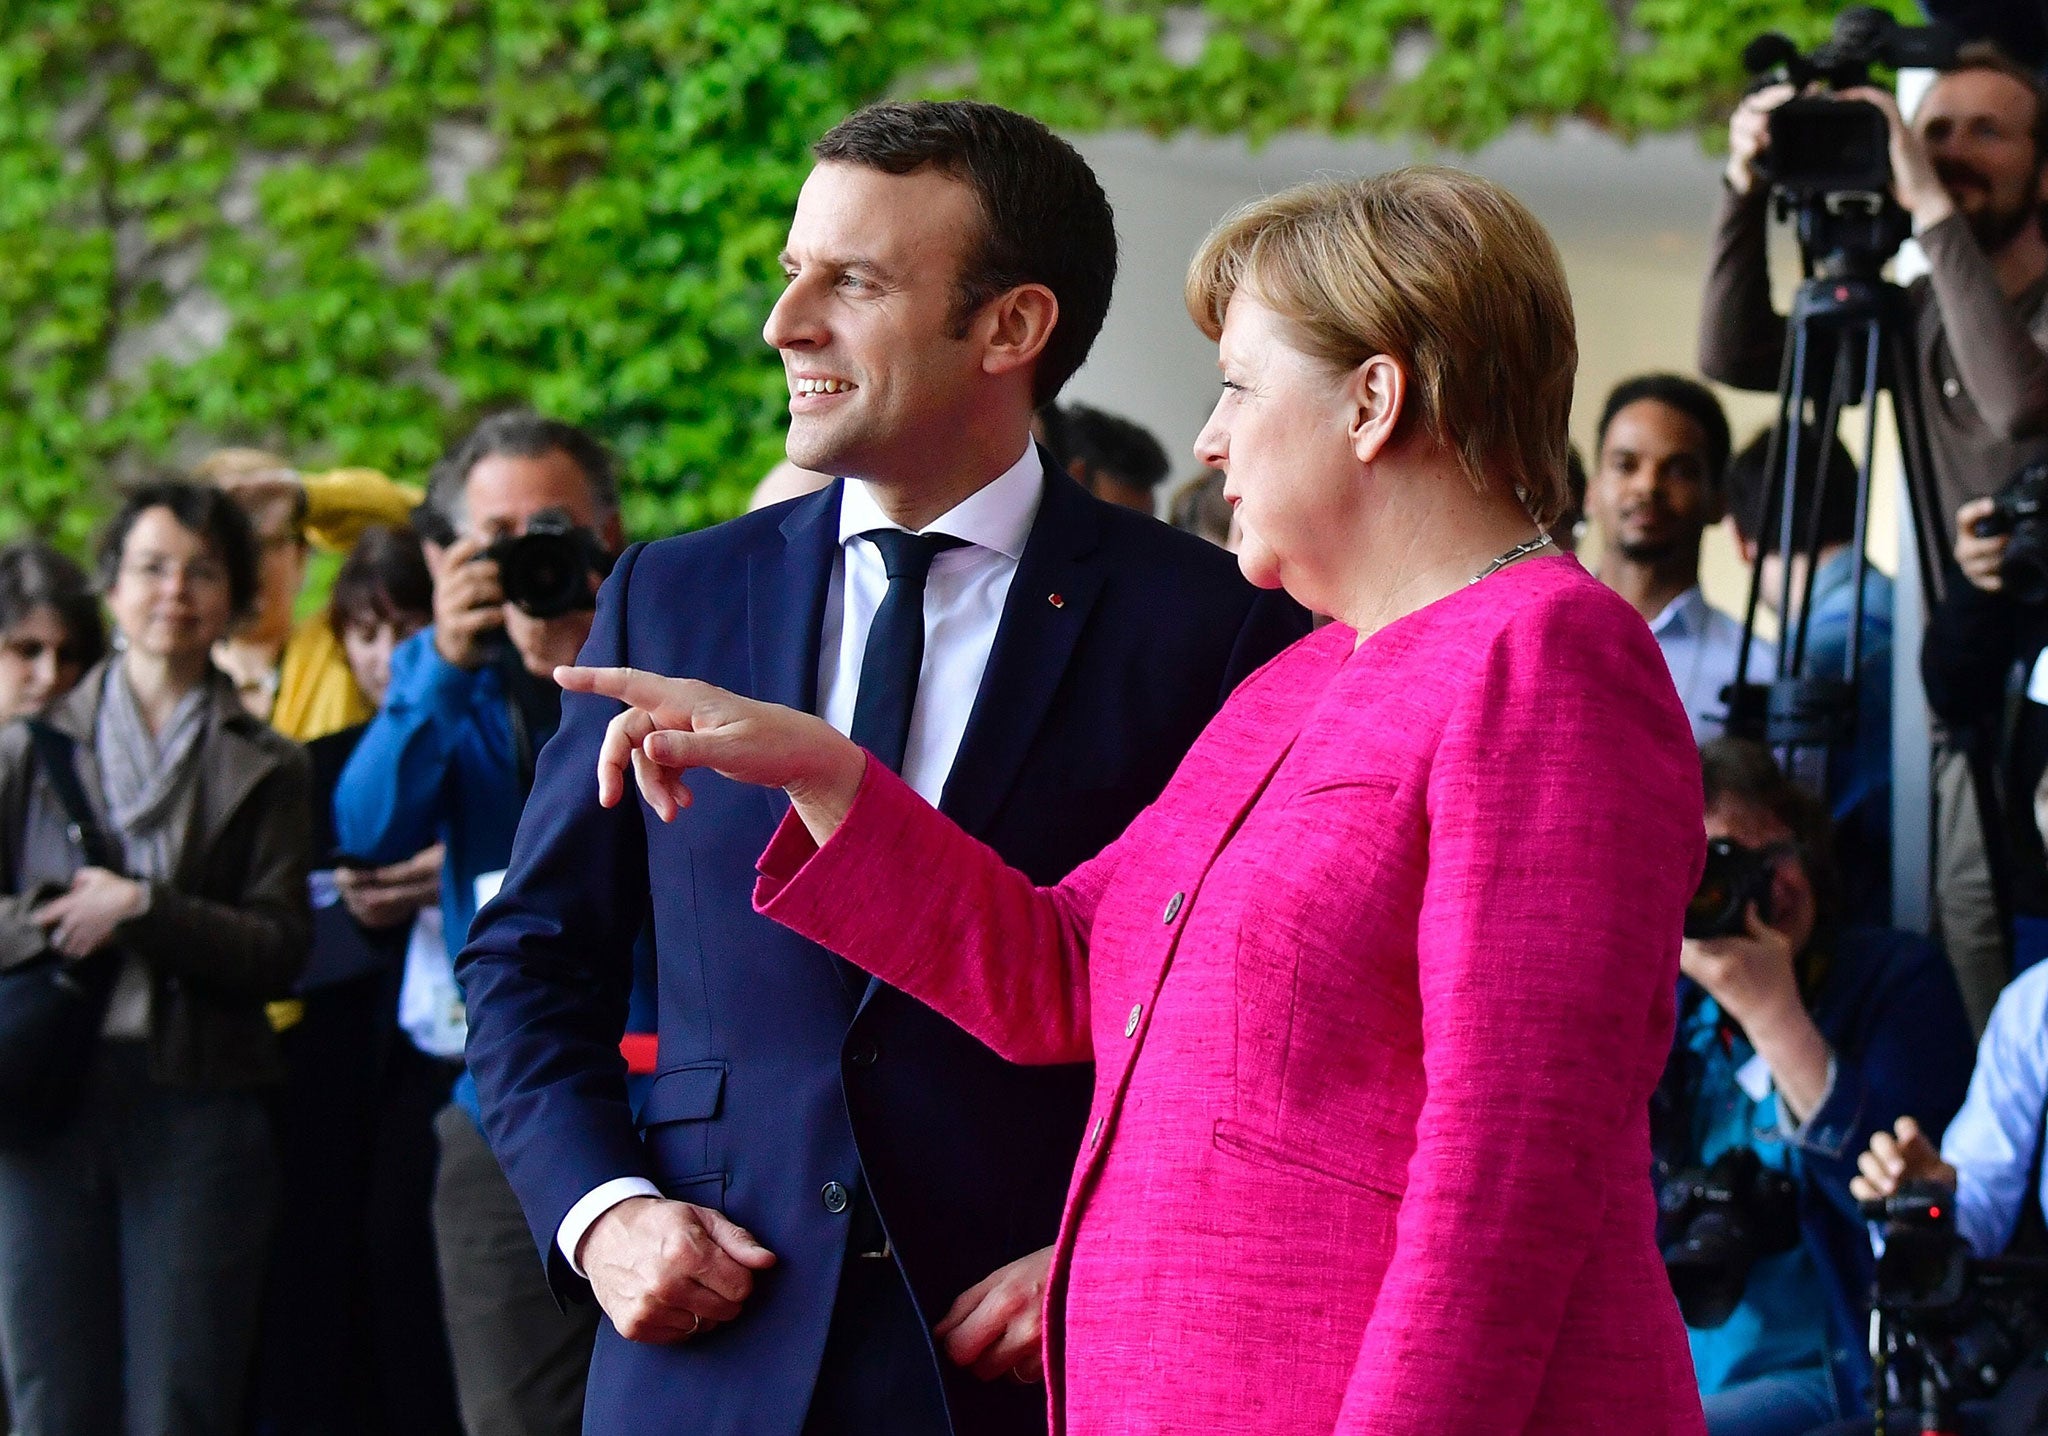 German Chancellor Angela Merkel welcomes Emmanuel Macron for talks on strengthening the EU, one day after the new French President took office (AFP/Getty)